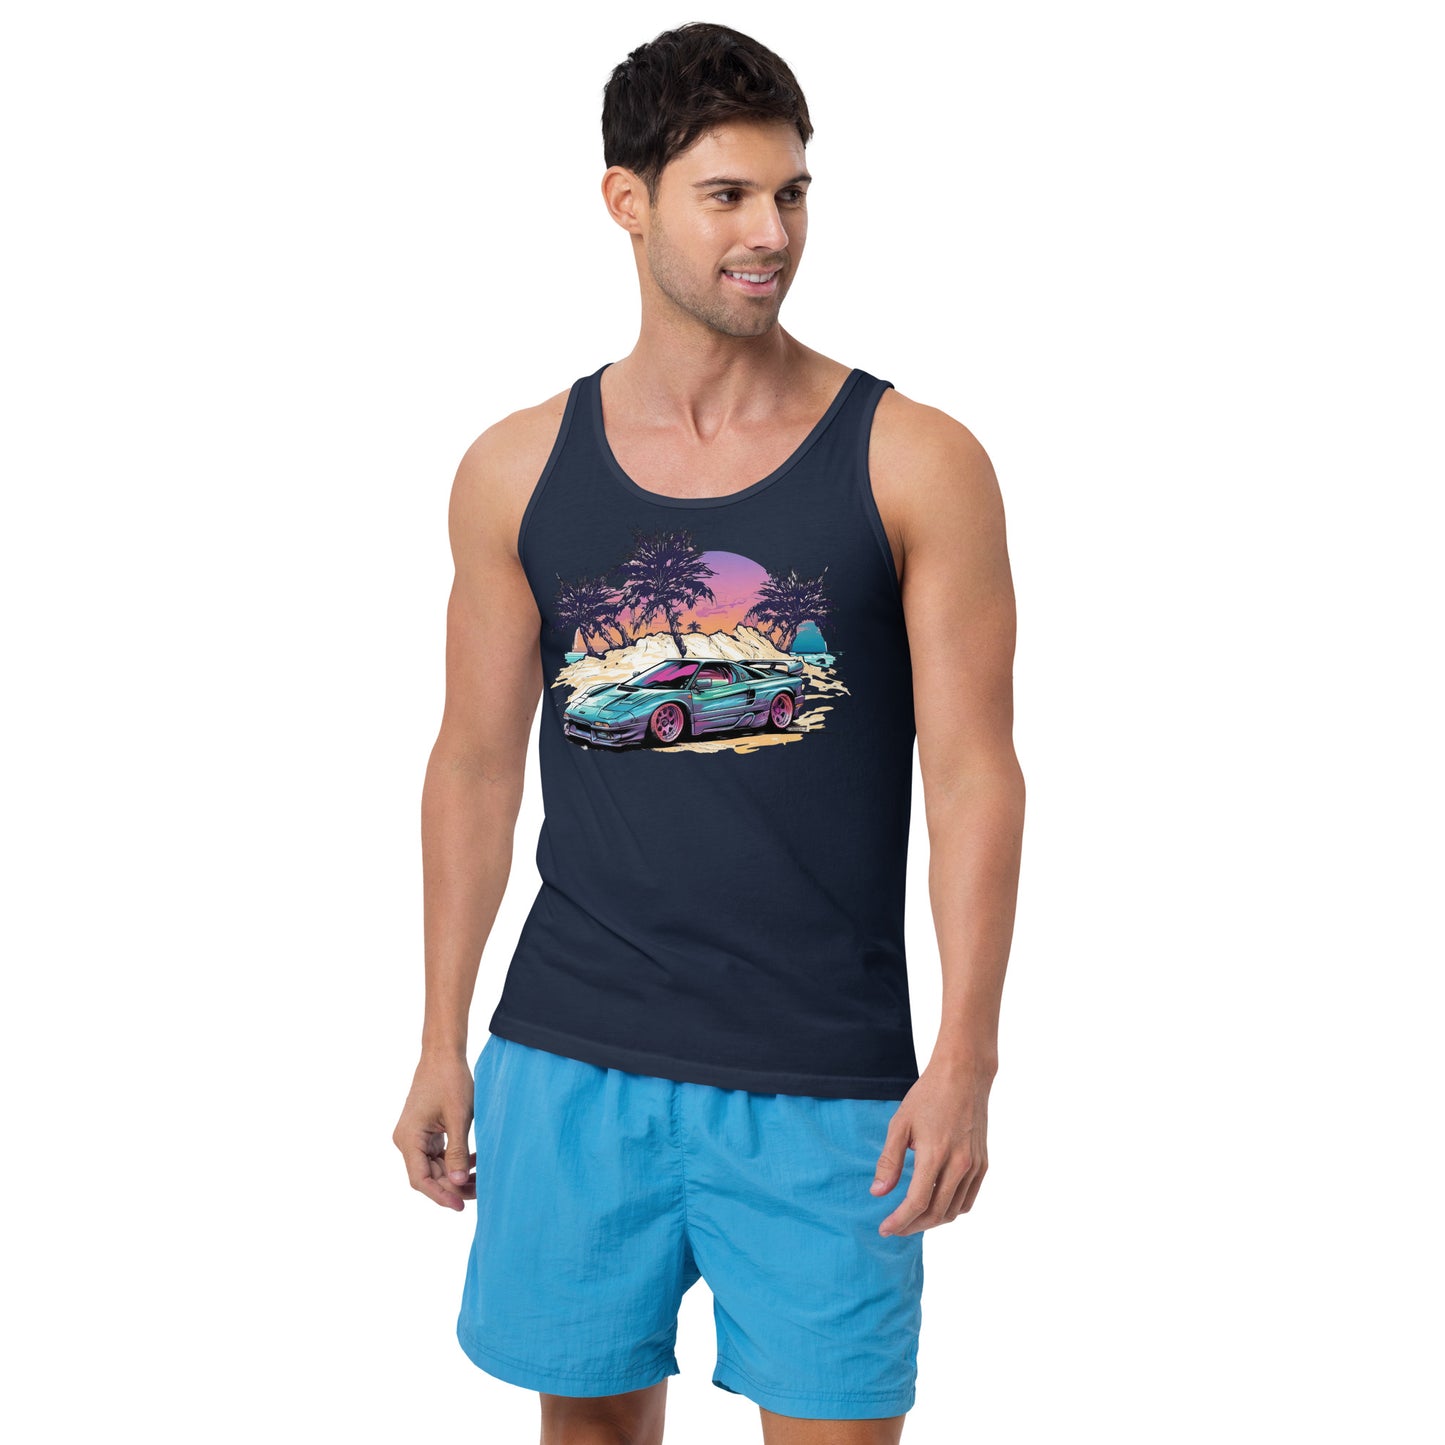 man with navy blue tank top with picture of vintage car in front of palm trees 